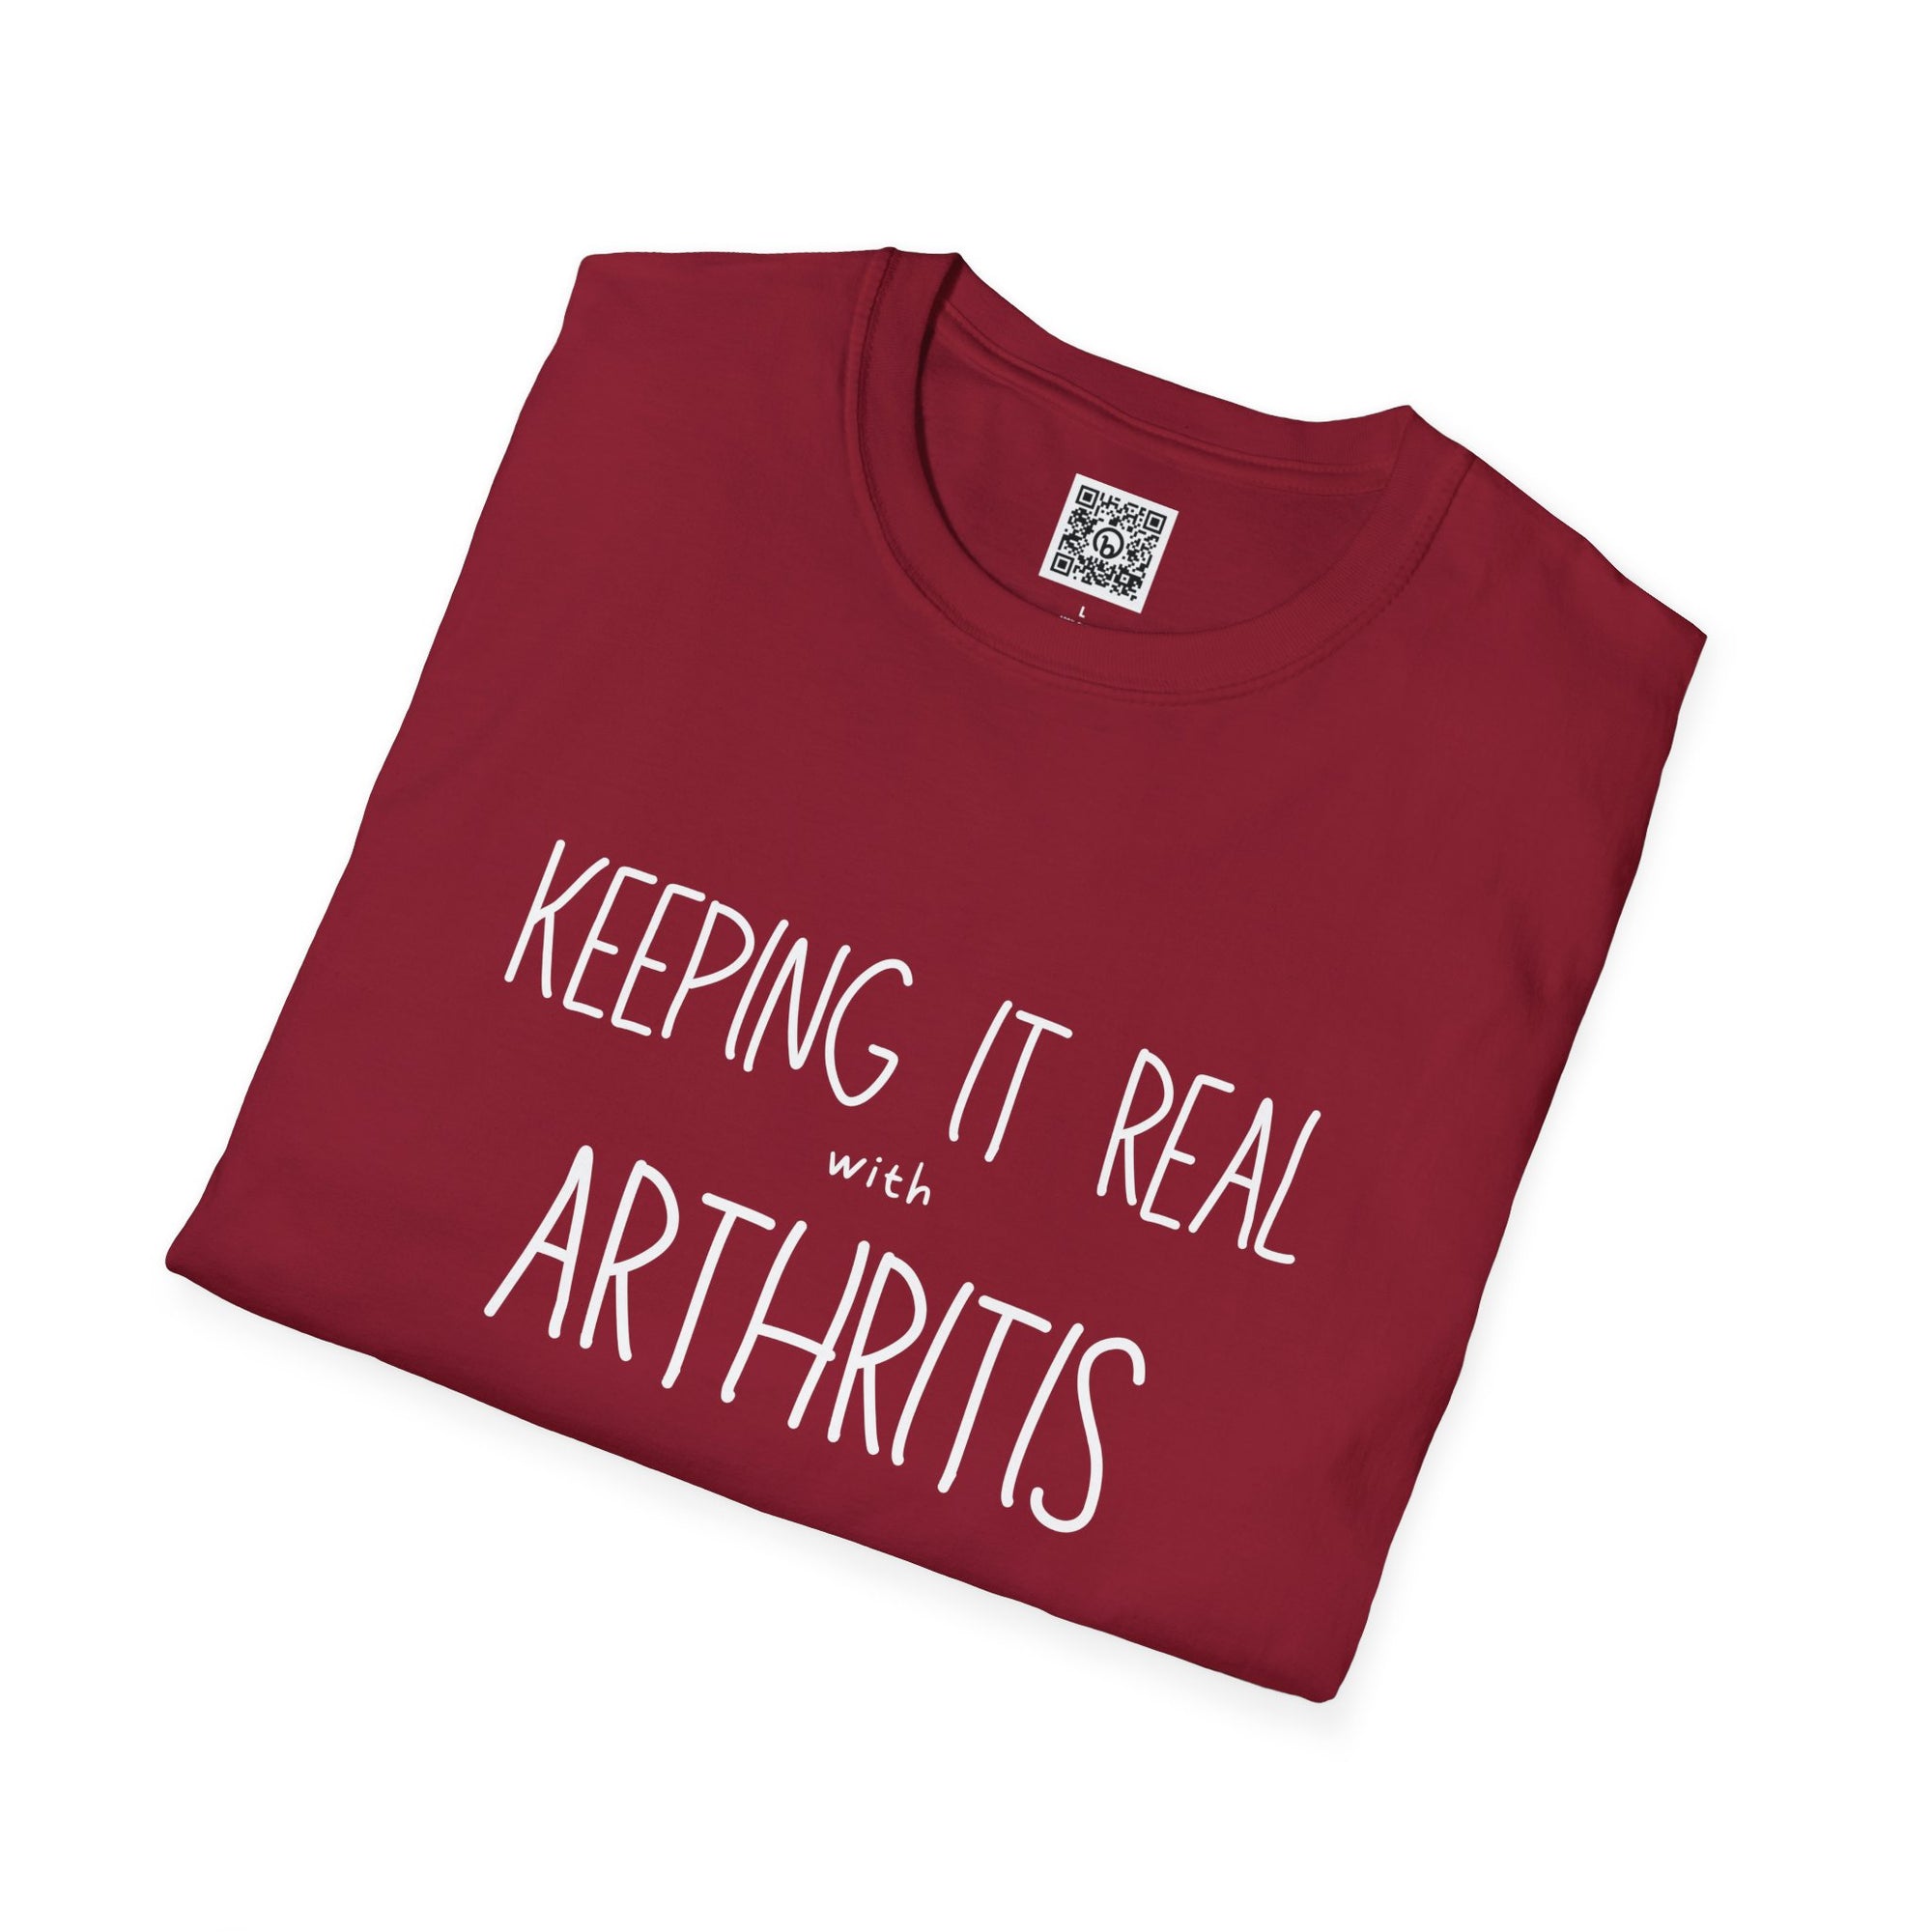 "Keeping it Real with Arthritis" + Arthritis Facts T-Shirt